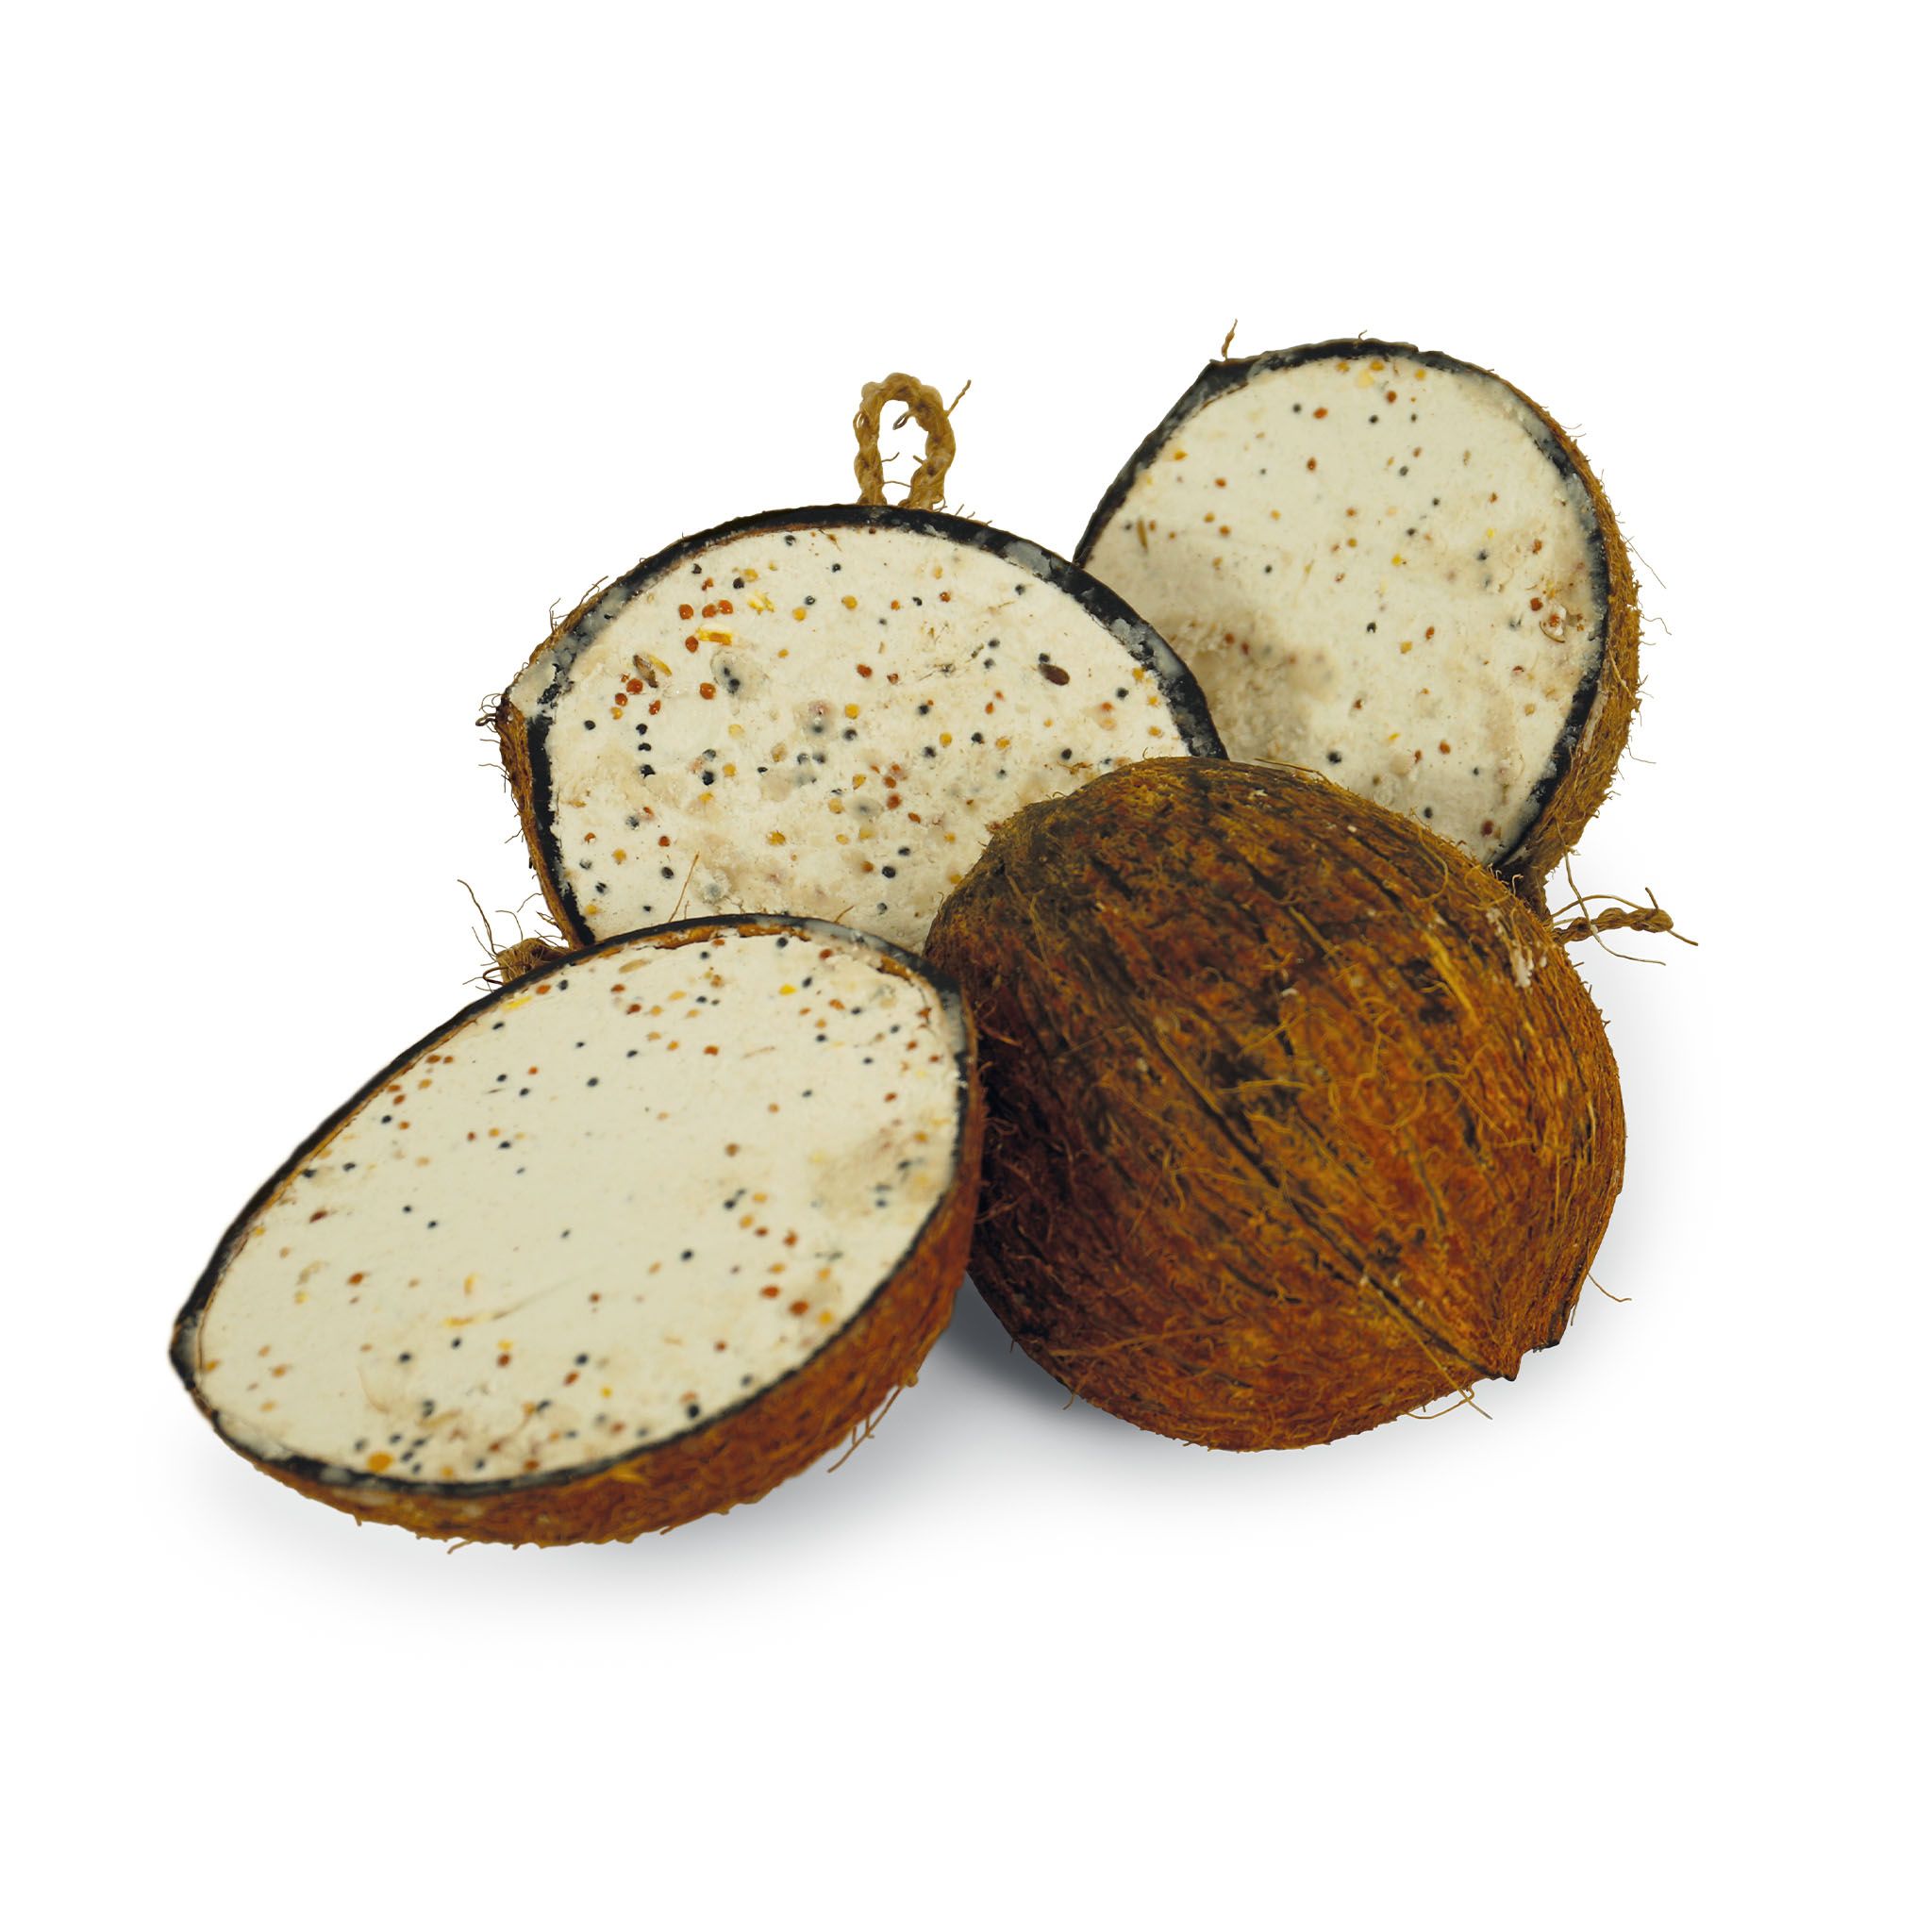 Peckish Coconut shell treat 1.4kg, Pack of 4